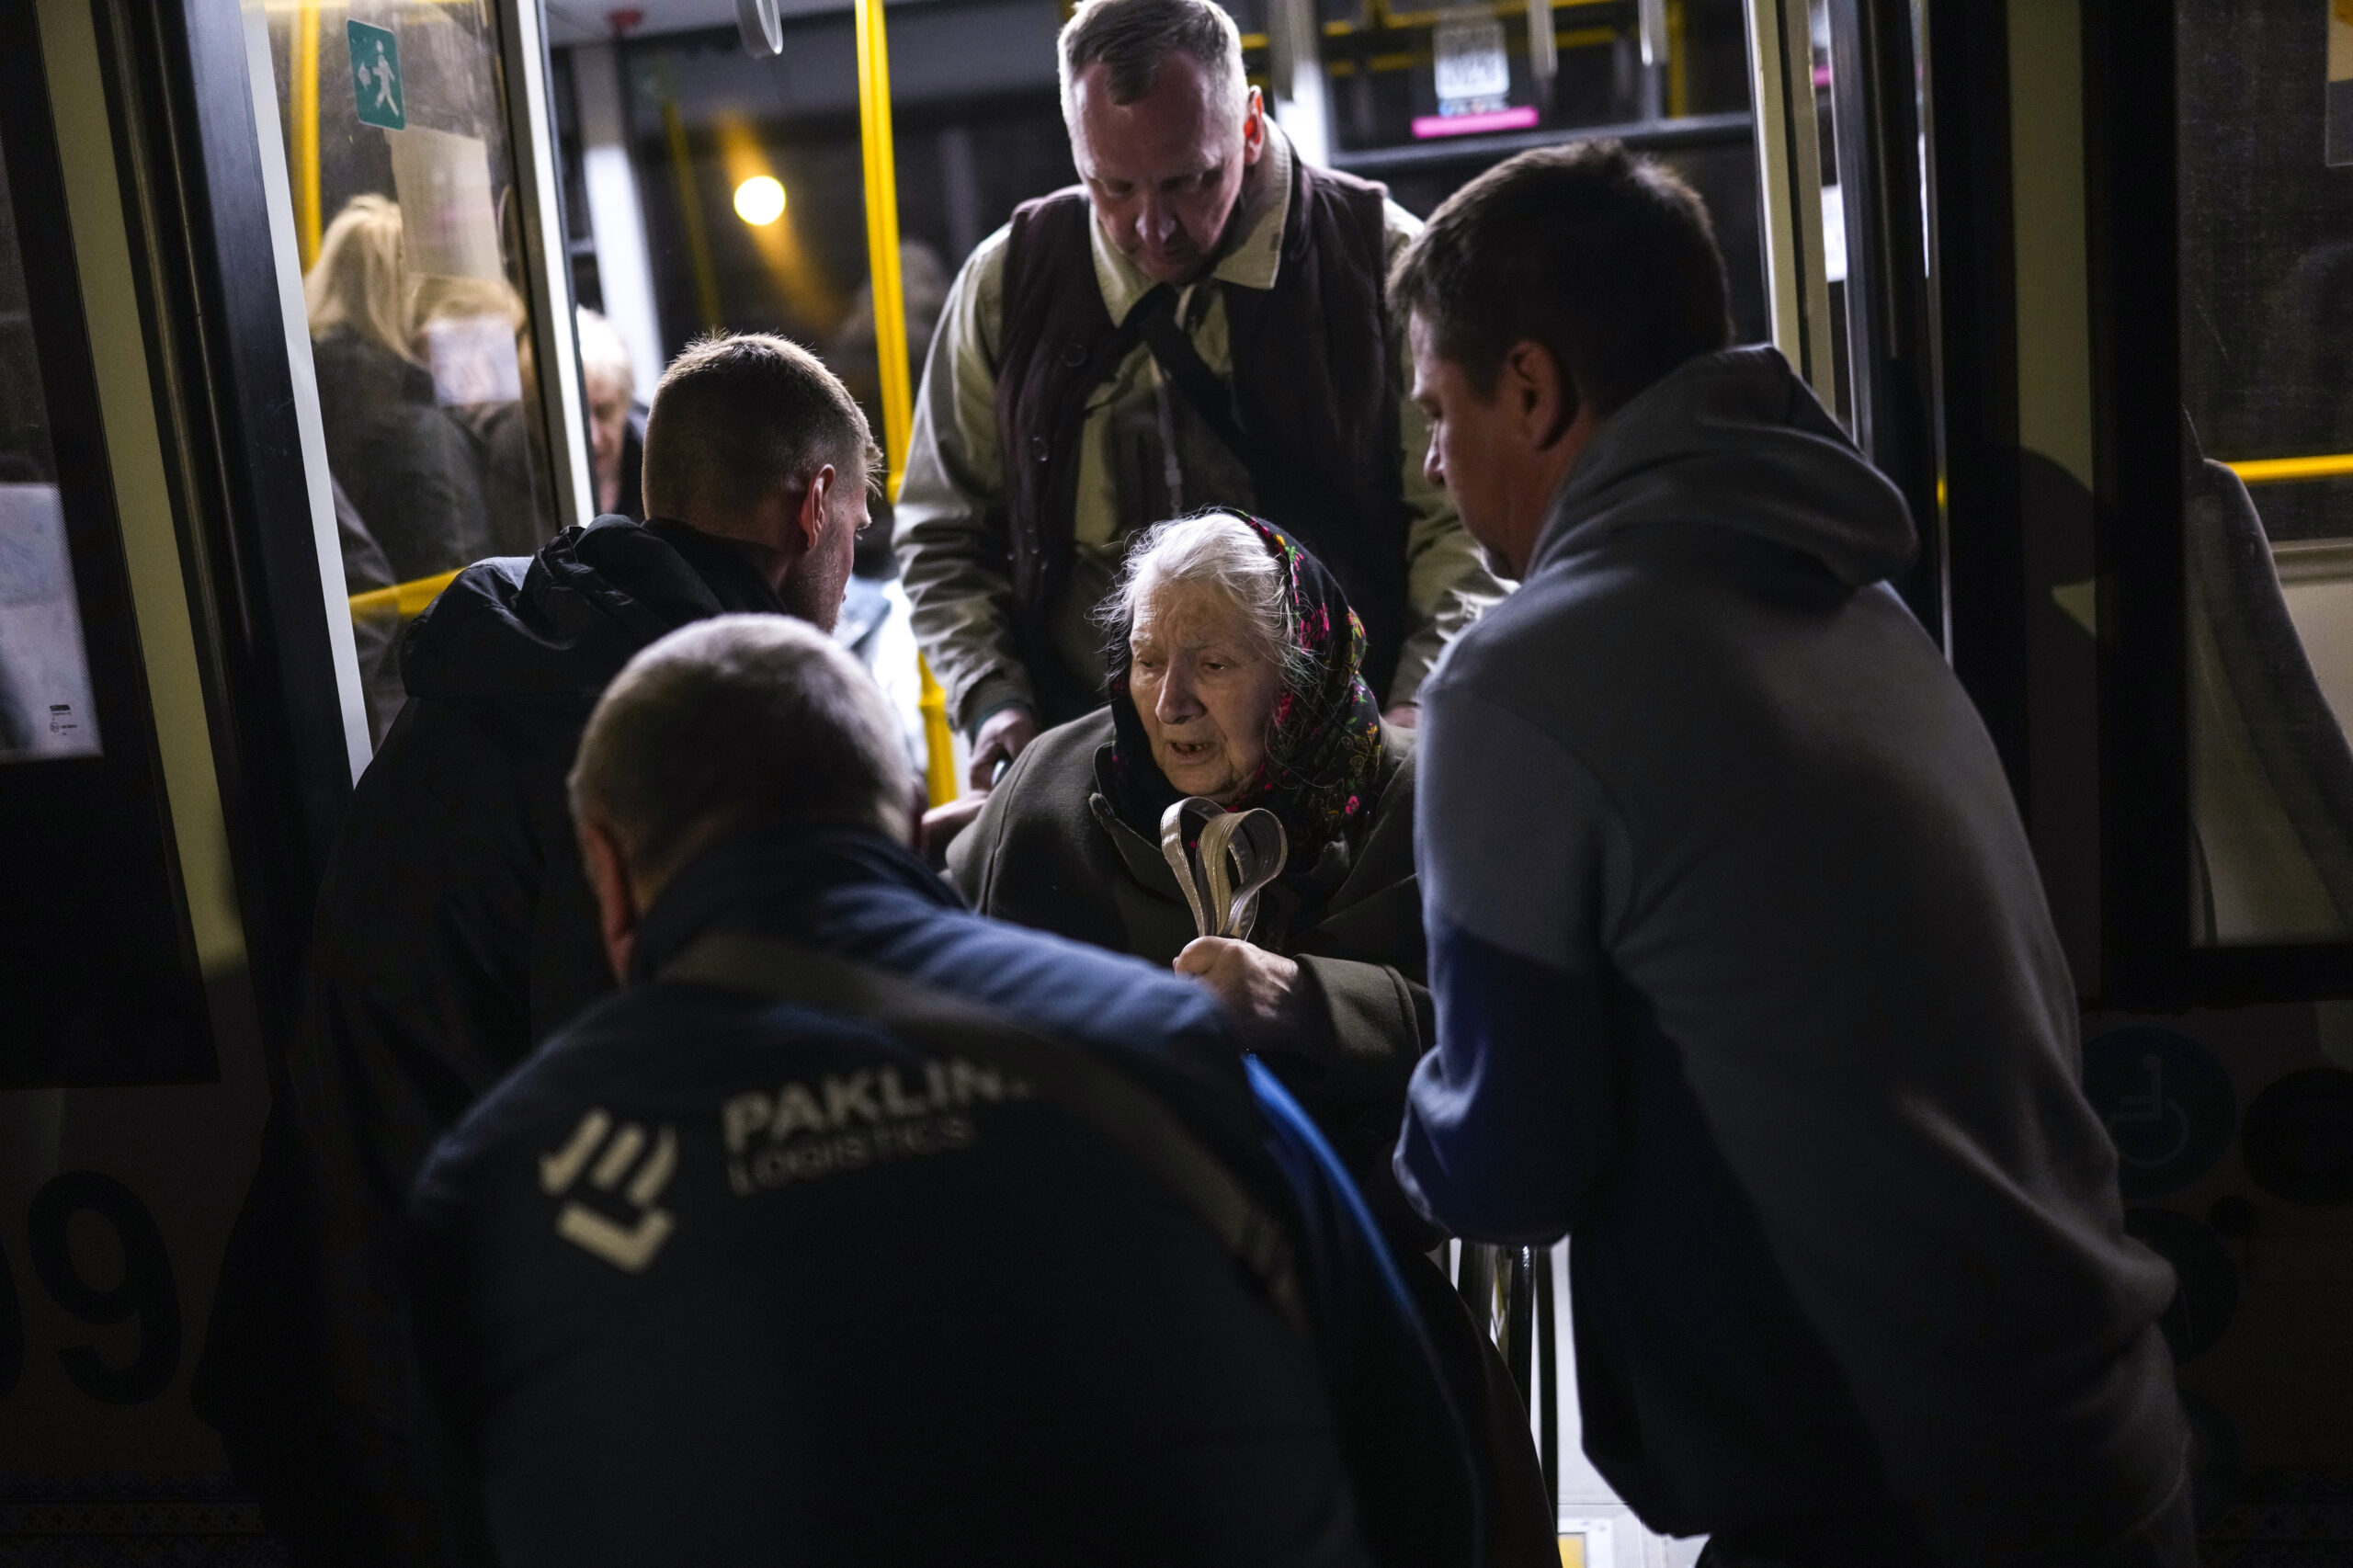 A woman who fled from the Azovstal steel plant in Mariupol is helped from a bus upon her arrival at a reception center for displaced people in Zaporizhzhia, Ukraine, late Sunday, May 8, 2022. Thousands of Ukrainians continue to leave Russian-occupied areas. (AP Photo/Francisco Seco)